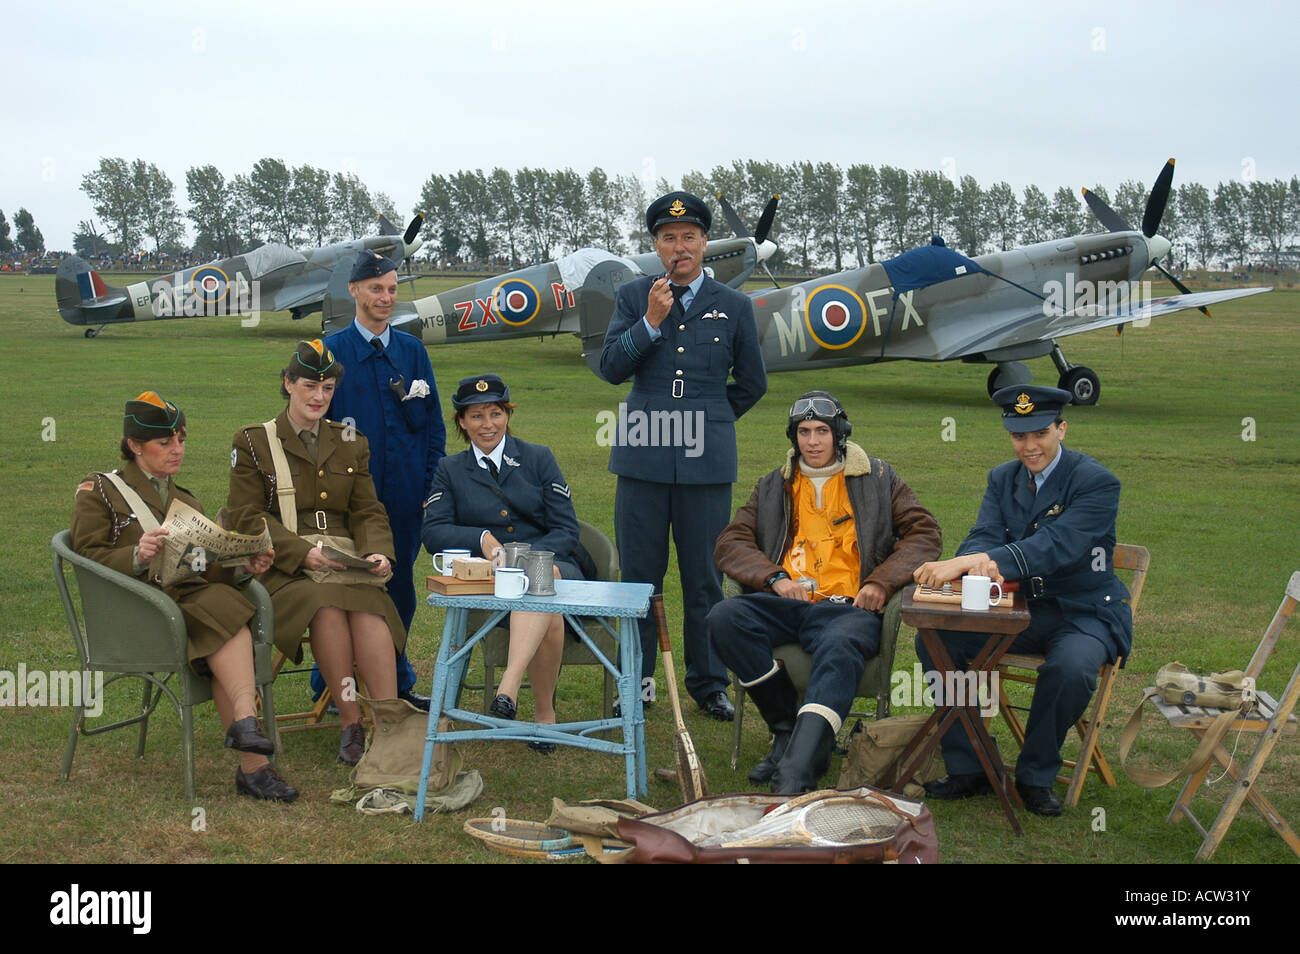 Goodwood Revival 2006, Second World War Revival of a Fighter Squadron Airfield with Spitfires in the background Stock Photo